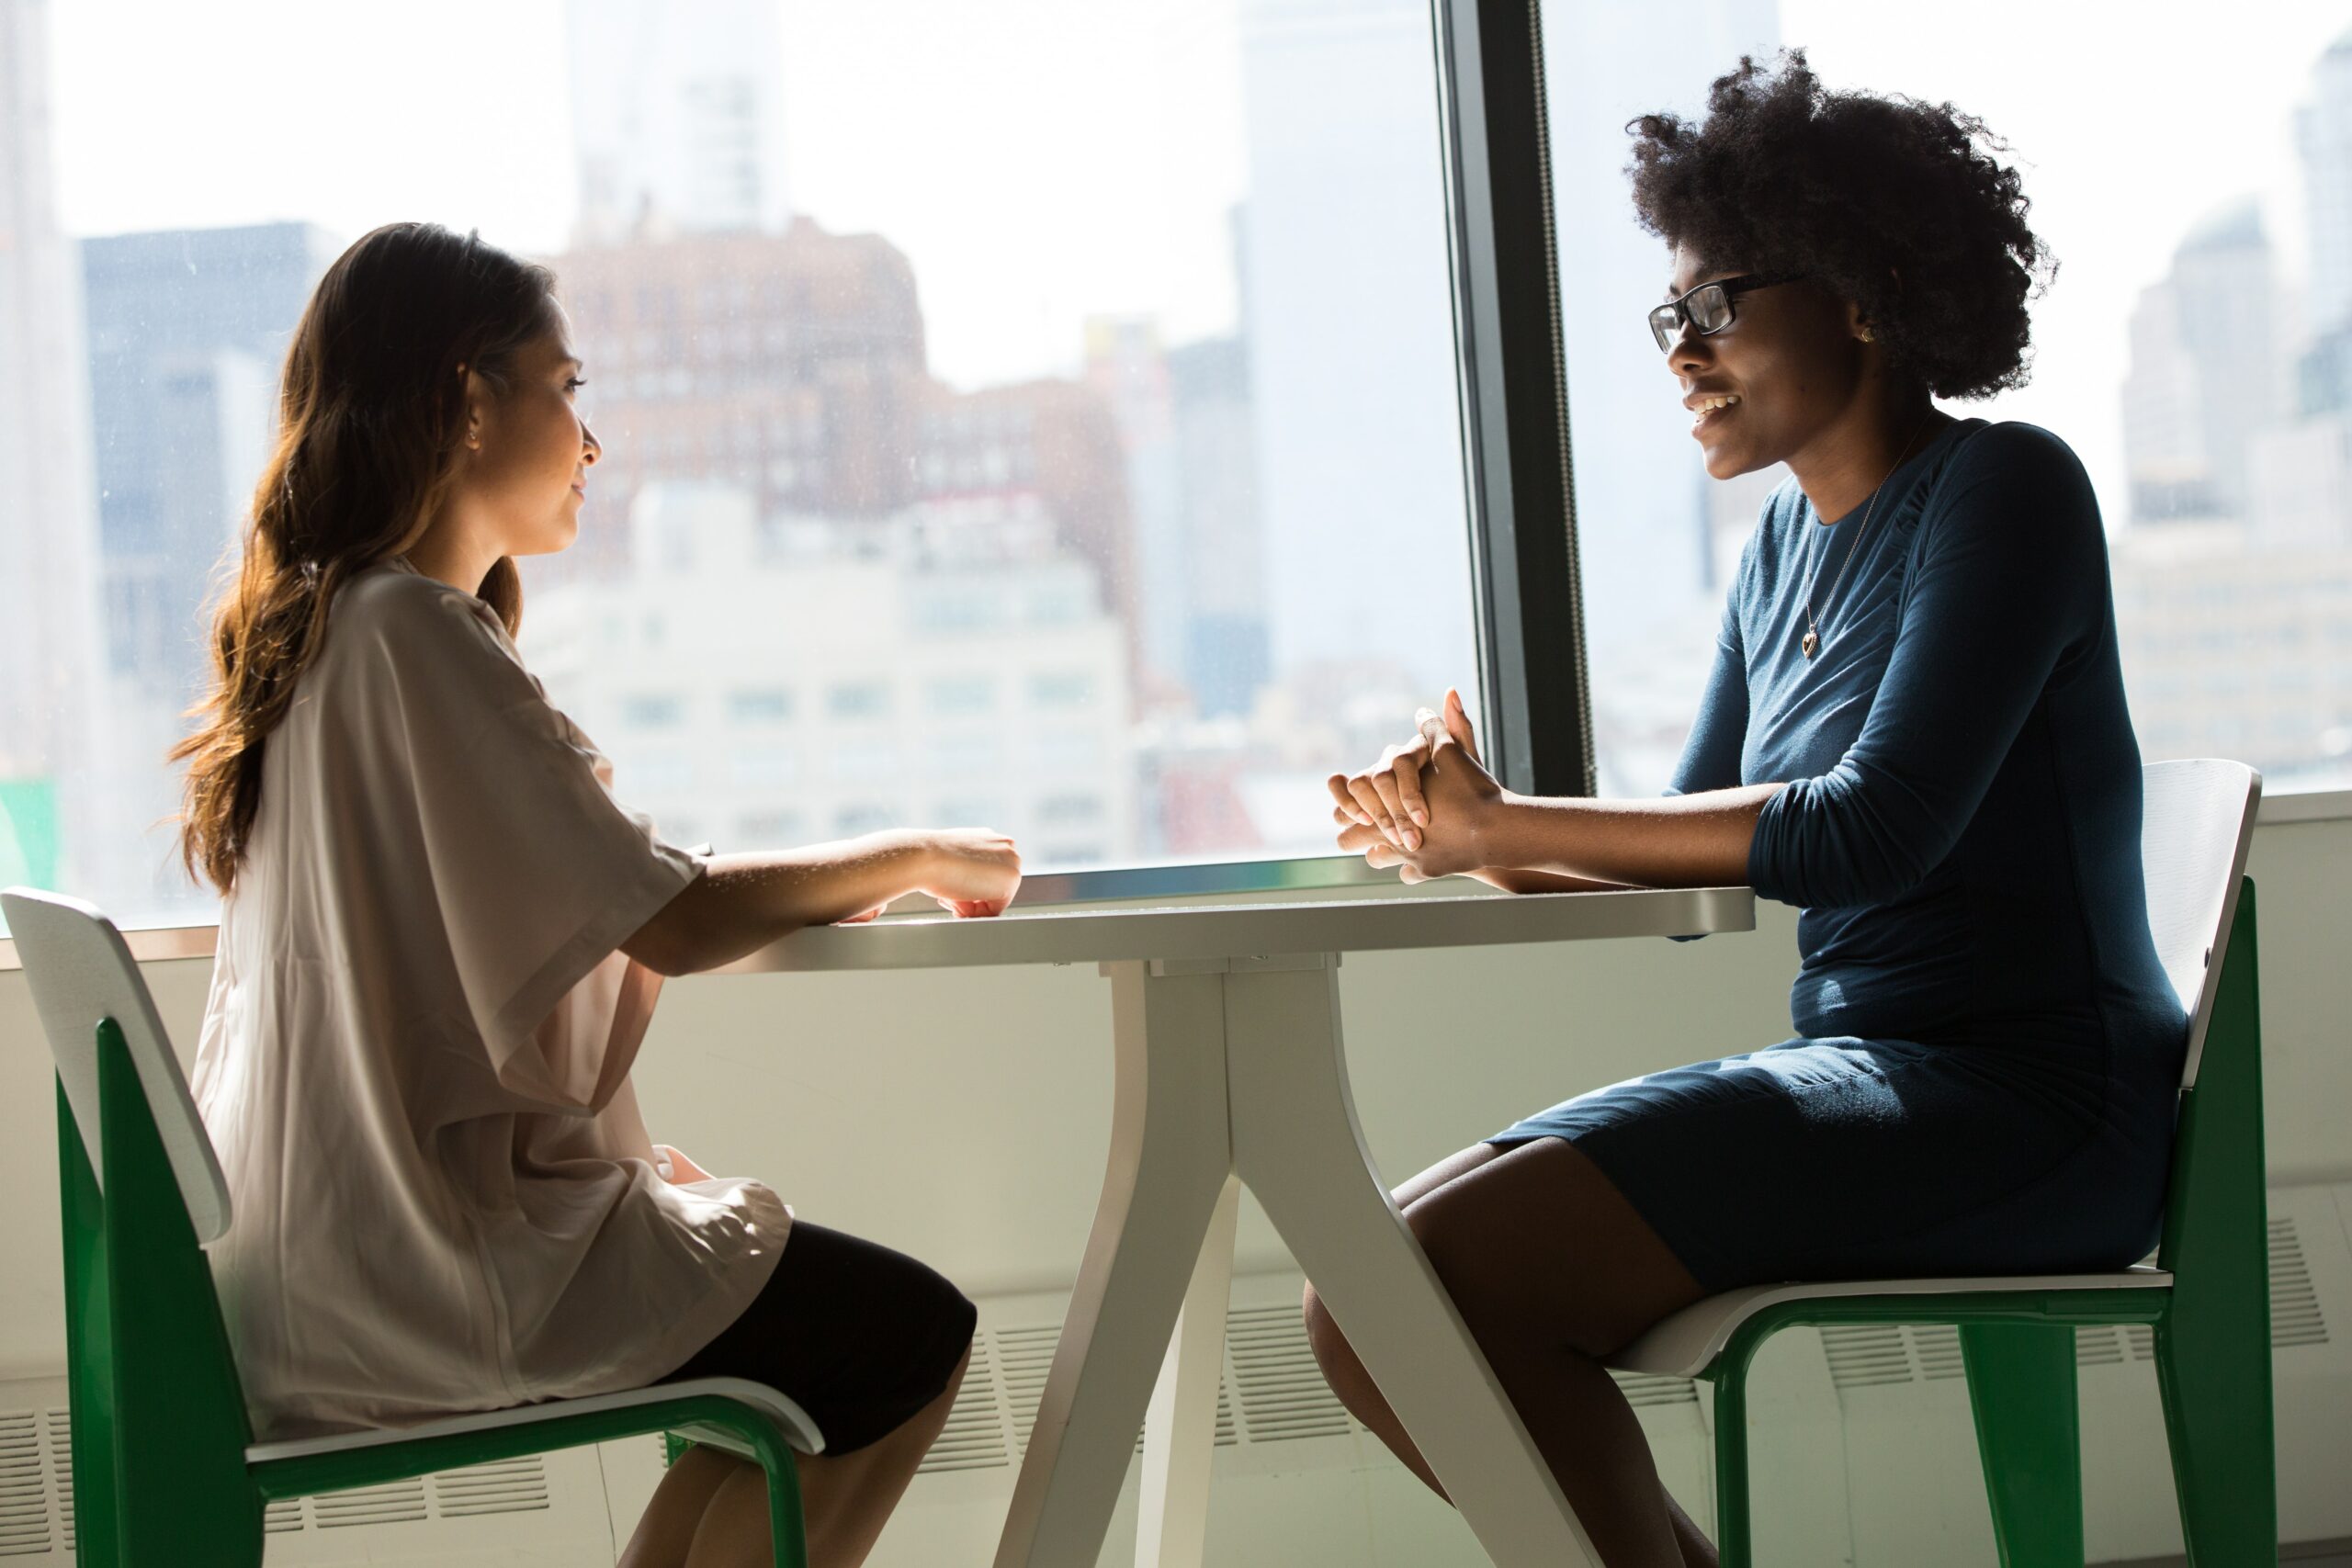 Aim Higher: How to handle some tricky interview situations